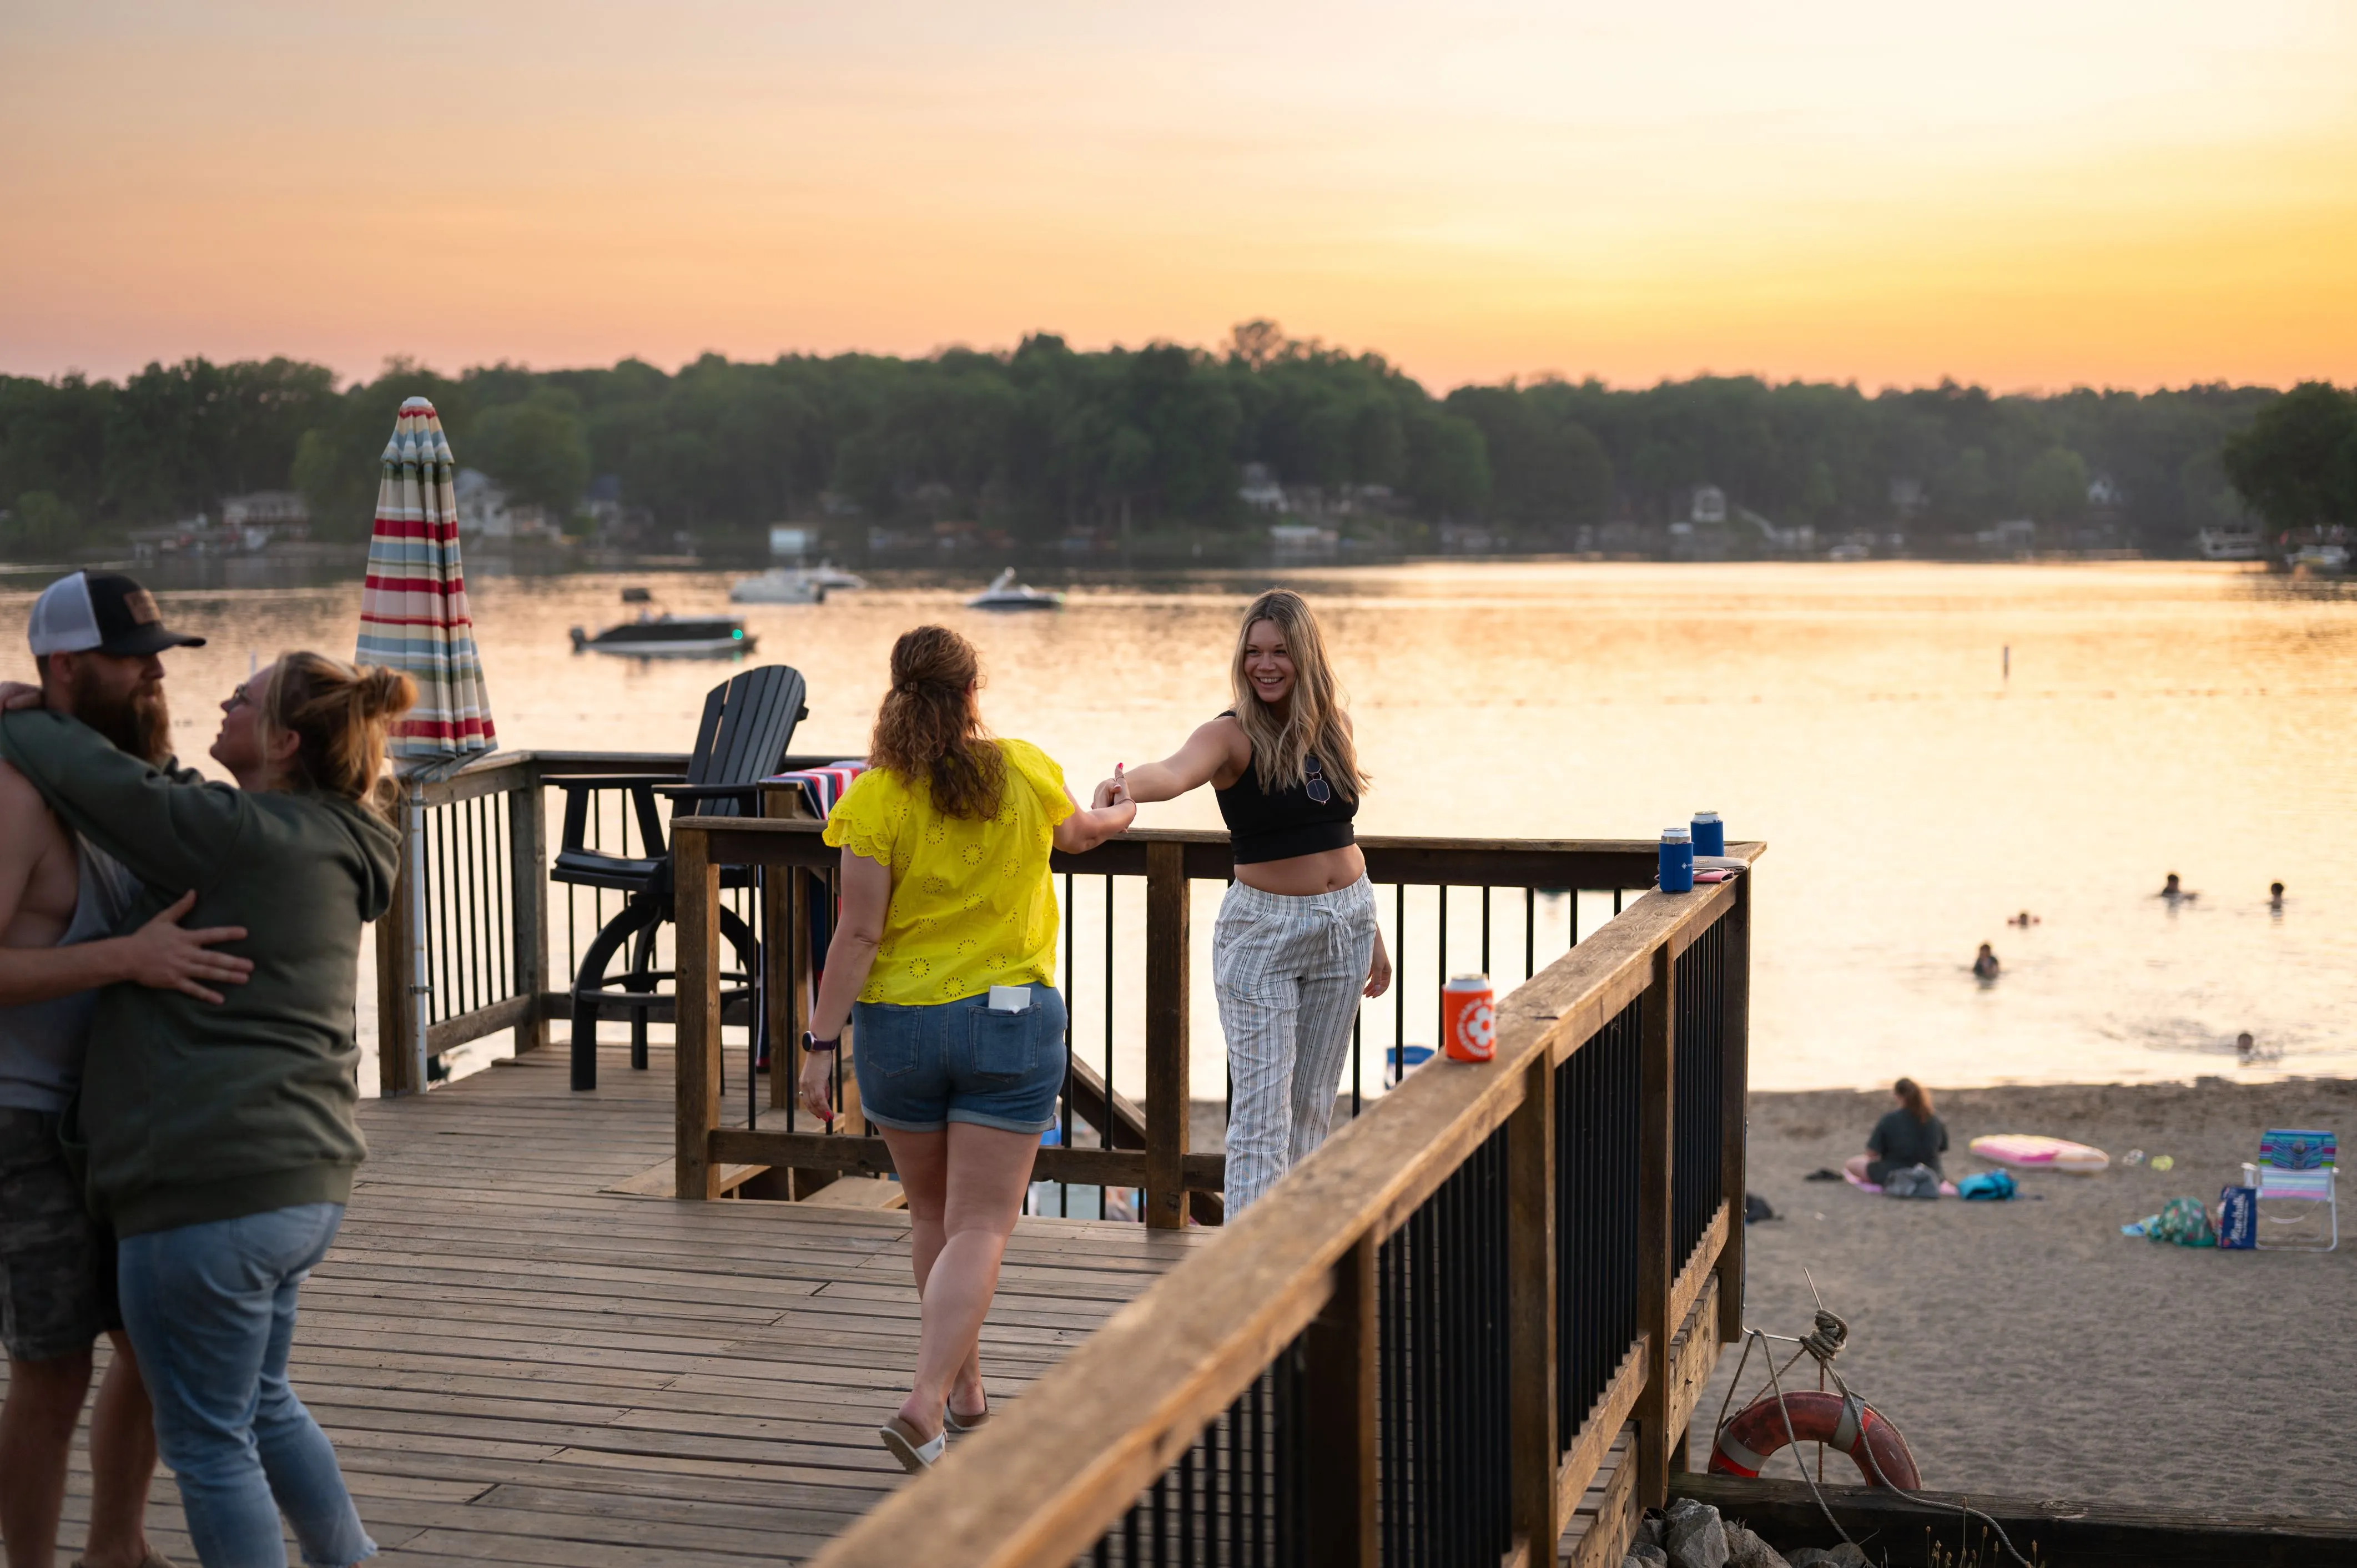 People enjoying a sunset at a lakeside dock, with some individuals standing, walking, and embracing.